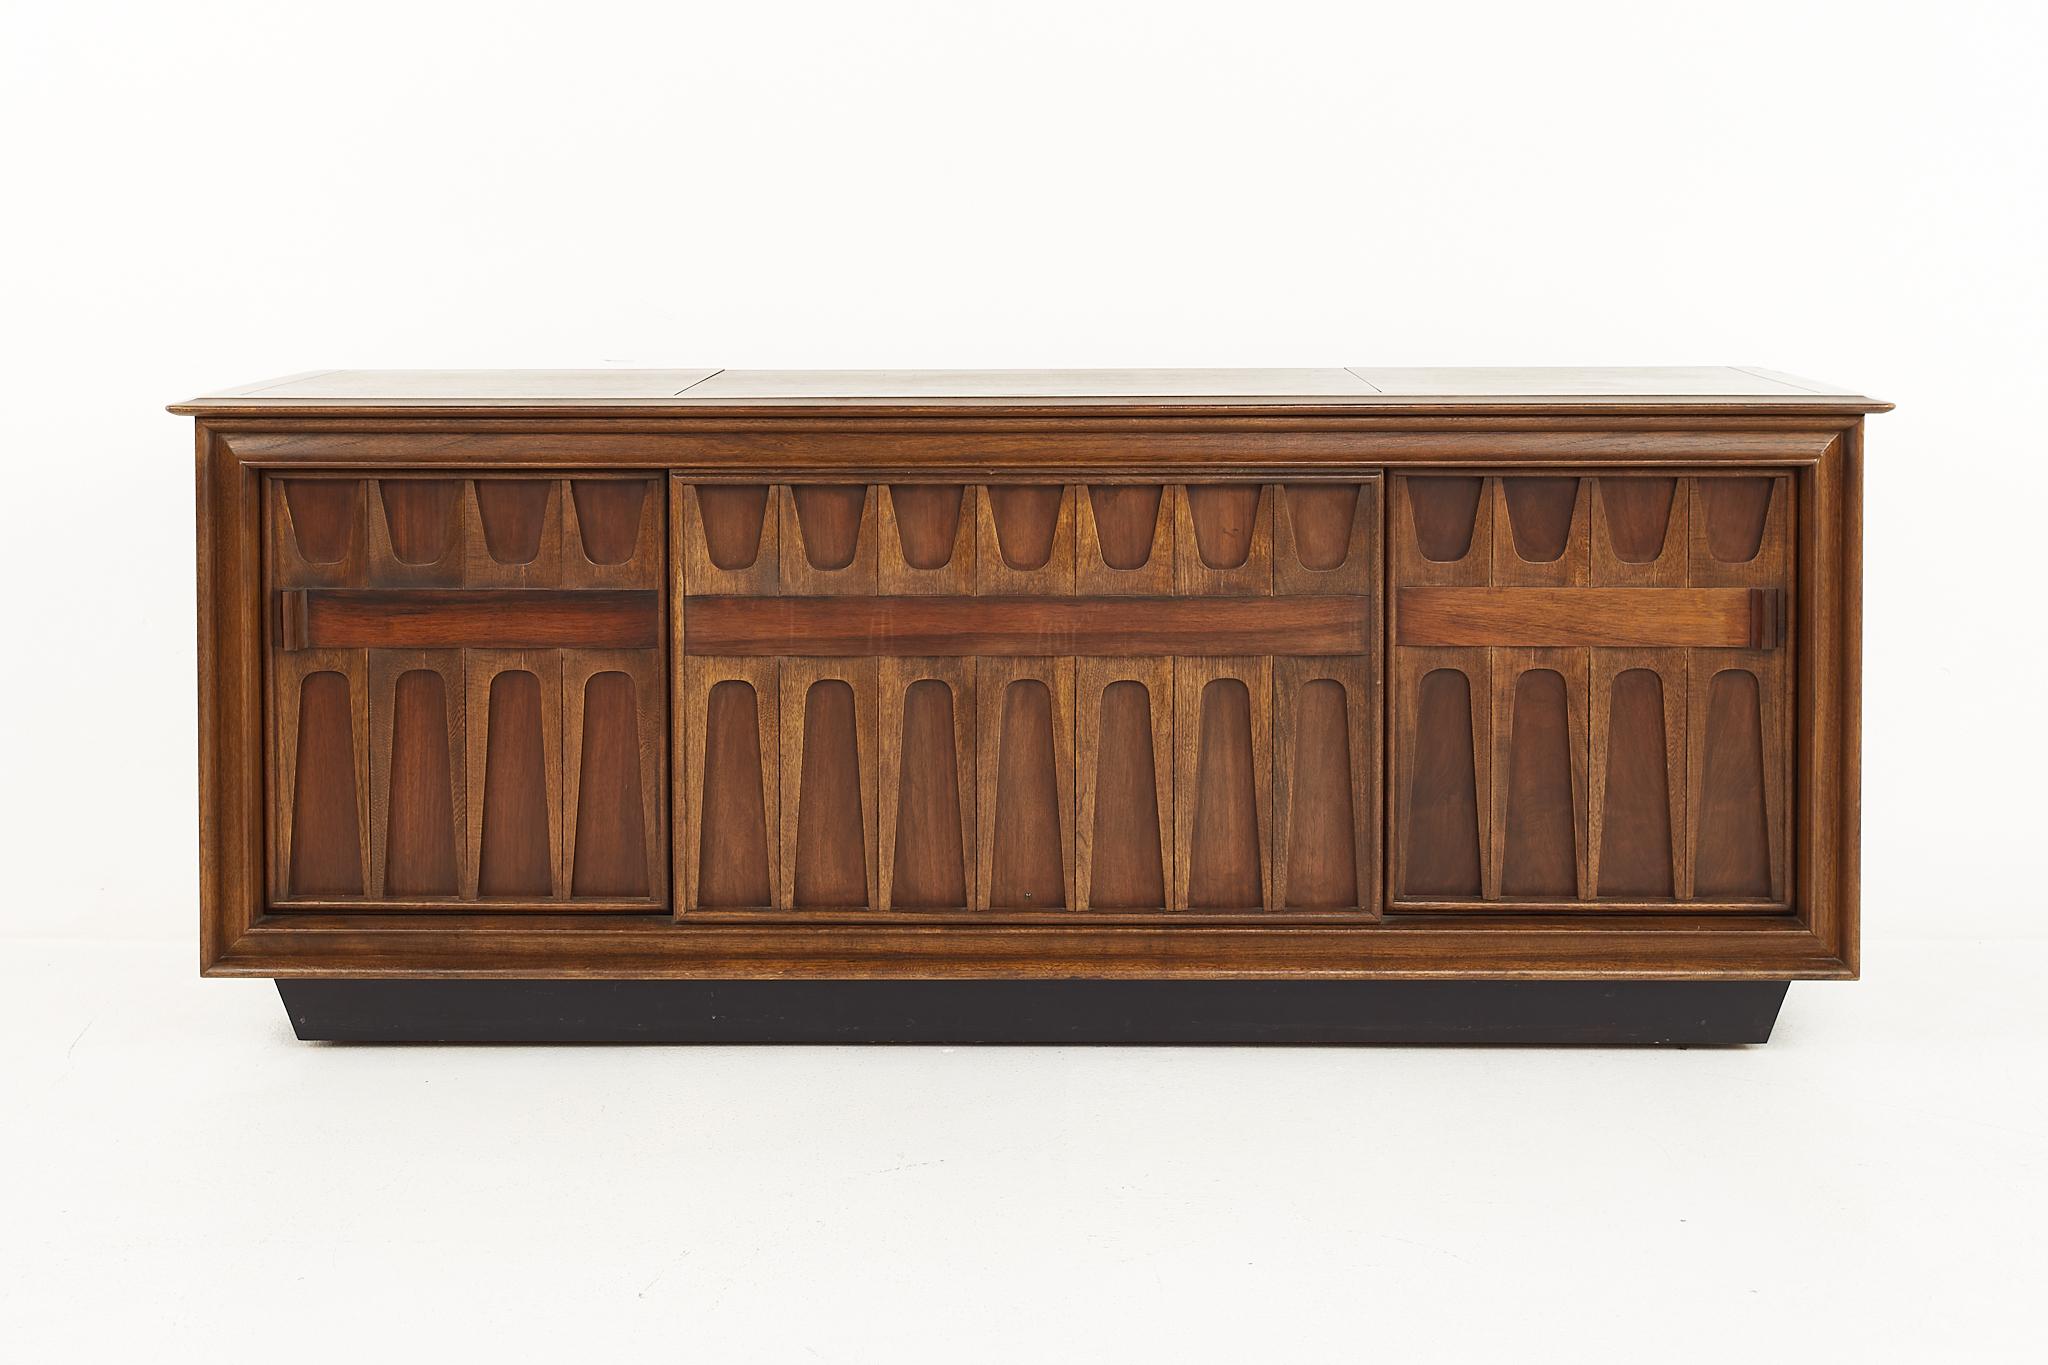 RCA Vista Broyhill Brasilia style mid century Stereo console

The stereo measures: 73.25 wide x 21 deep x 28.5 inches high

All pieces of furniture can be had in what we call restored vintage condition. That means the piece is restored upon